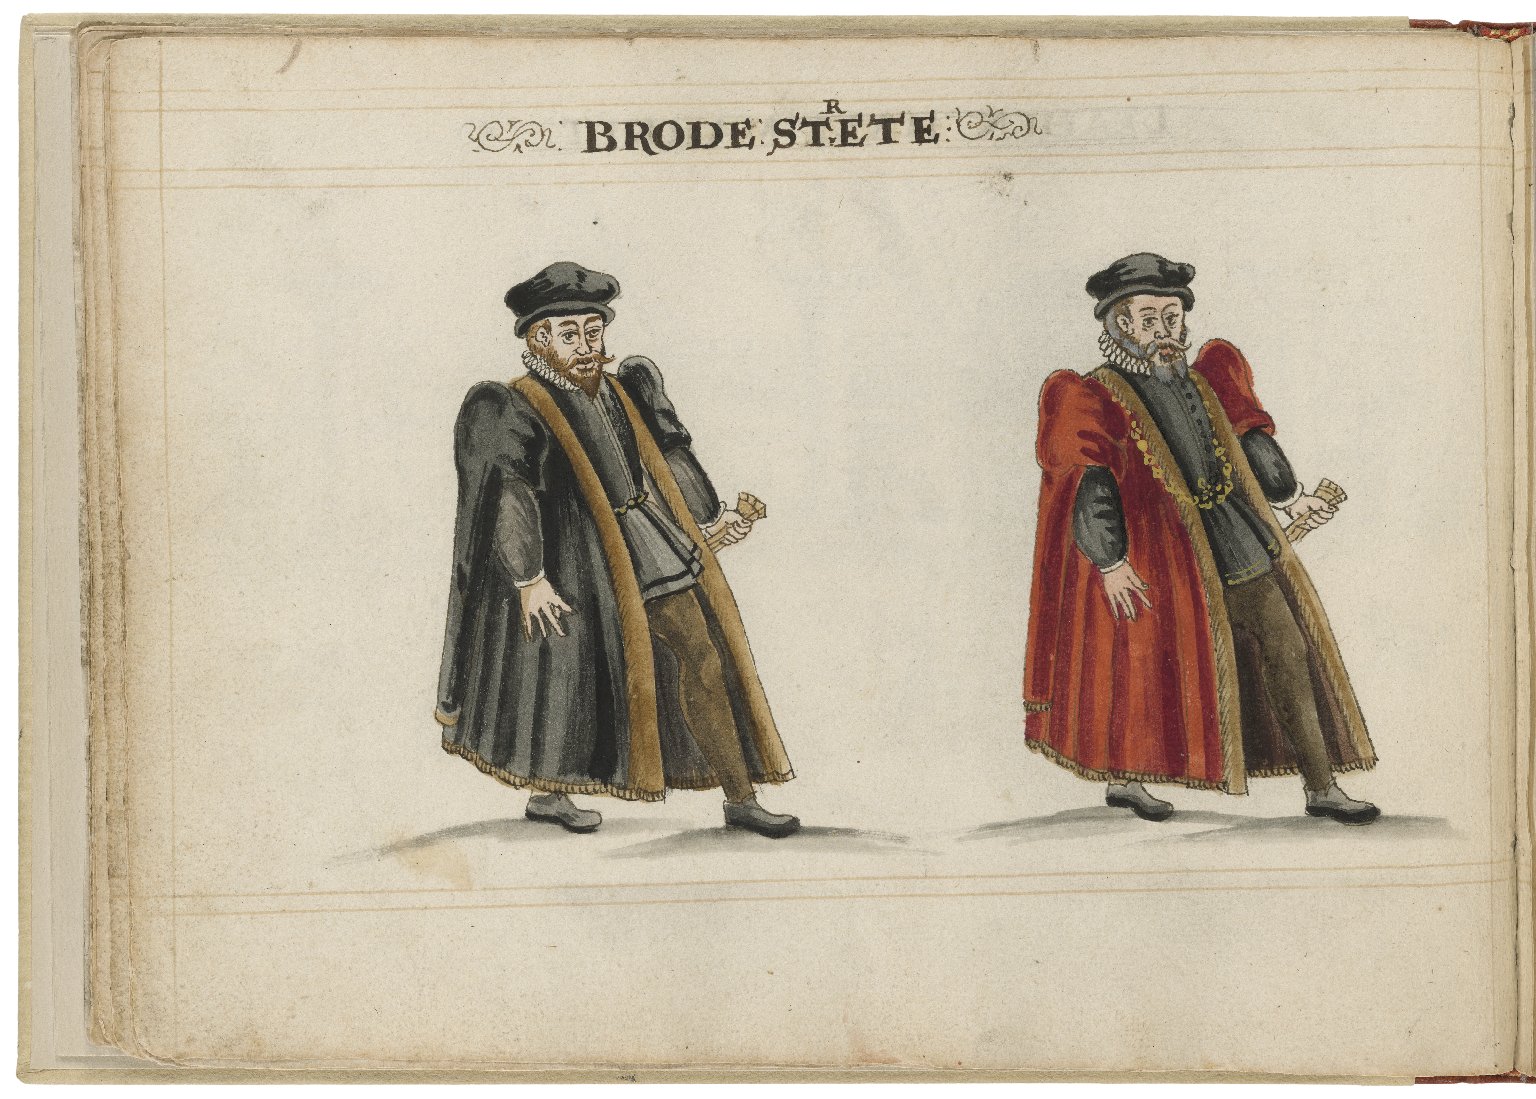 Watercolour painting of the alderman and deputy in charge of Broad Street Ward by Hugh Alley. Image courtesy of the Folger Digital Image Collection.